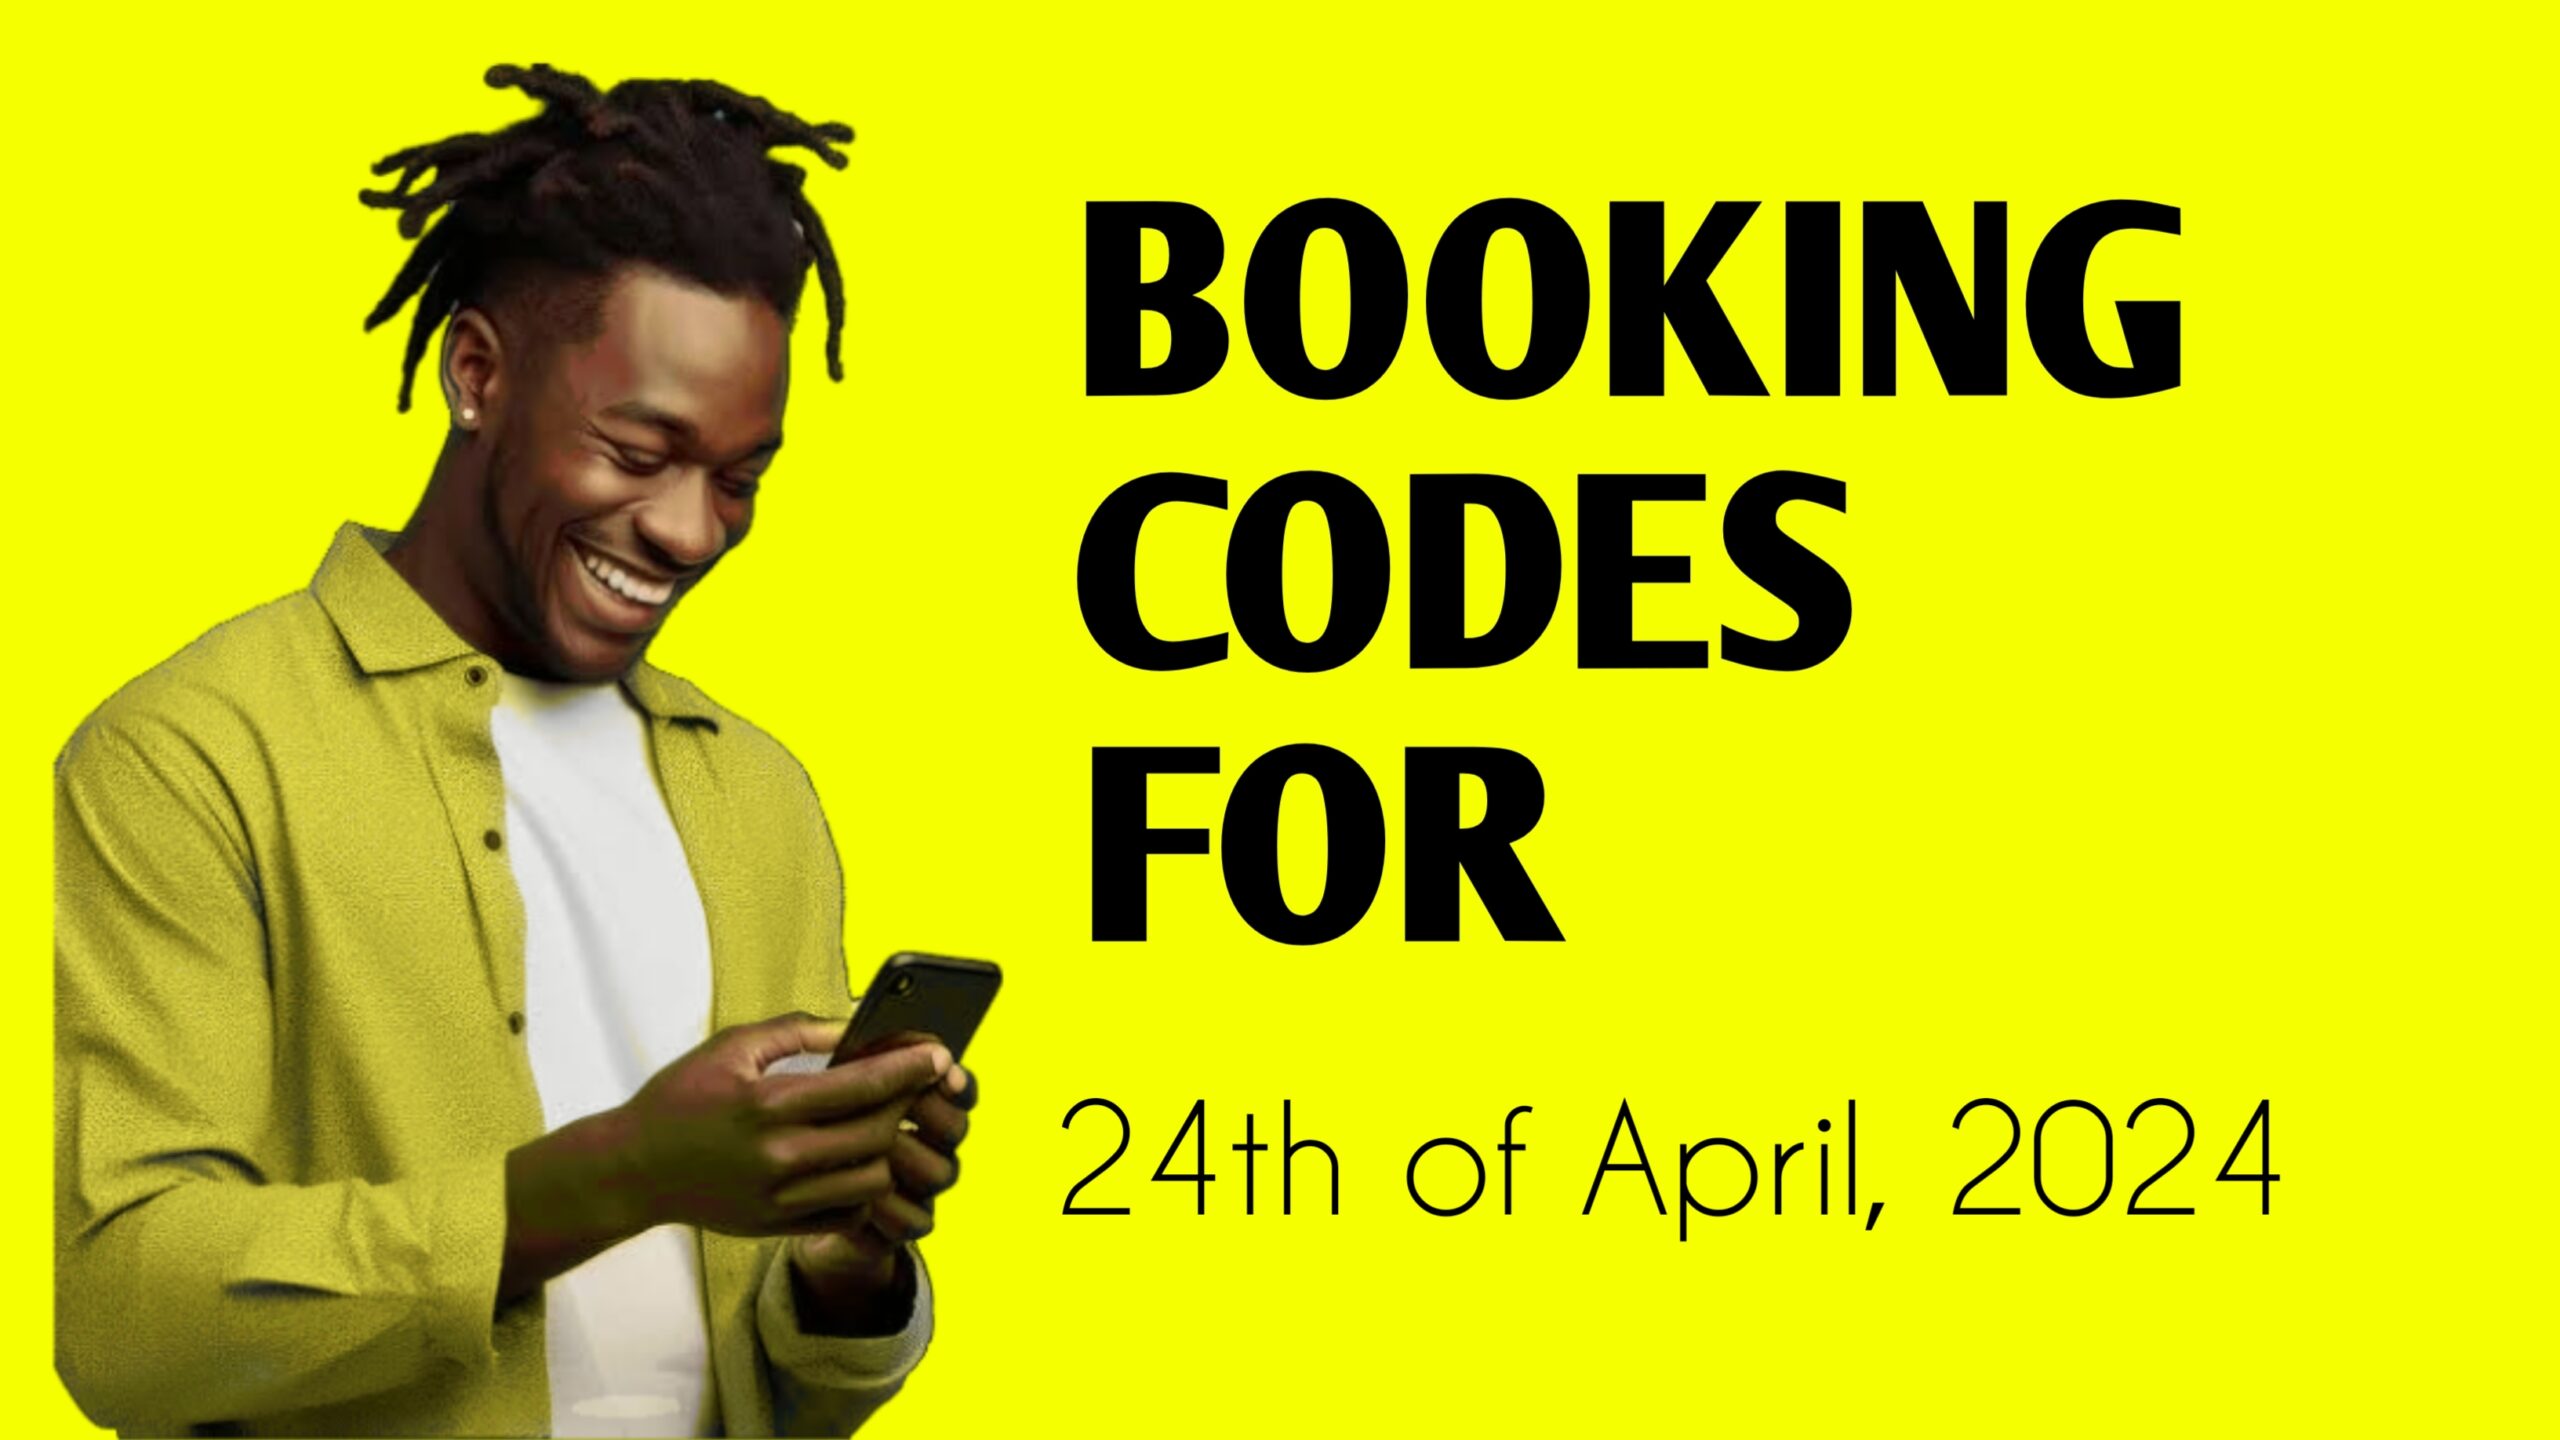 Booking Codes for 24th of April, 2024